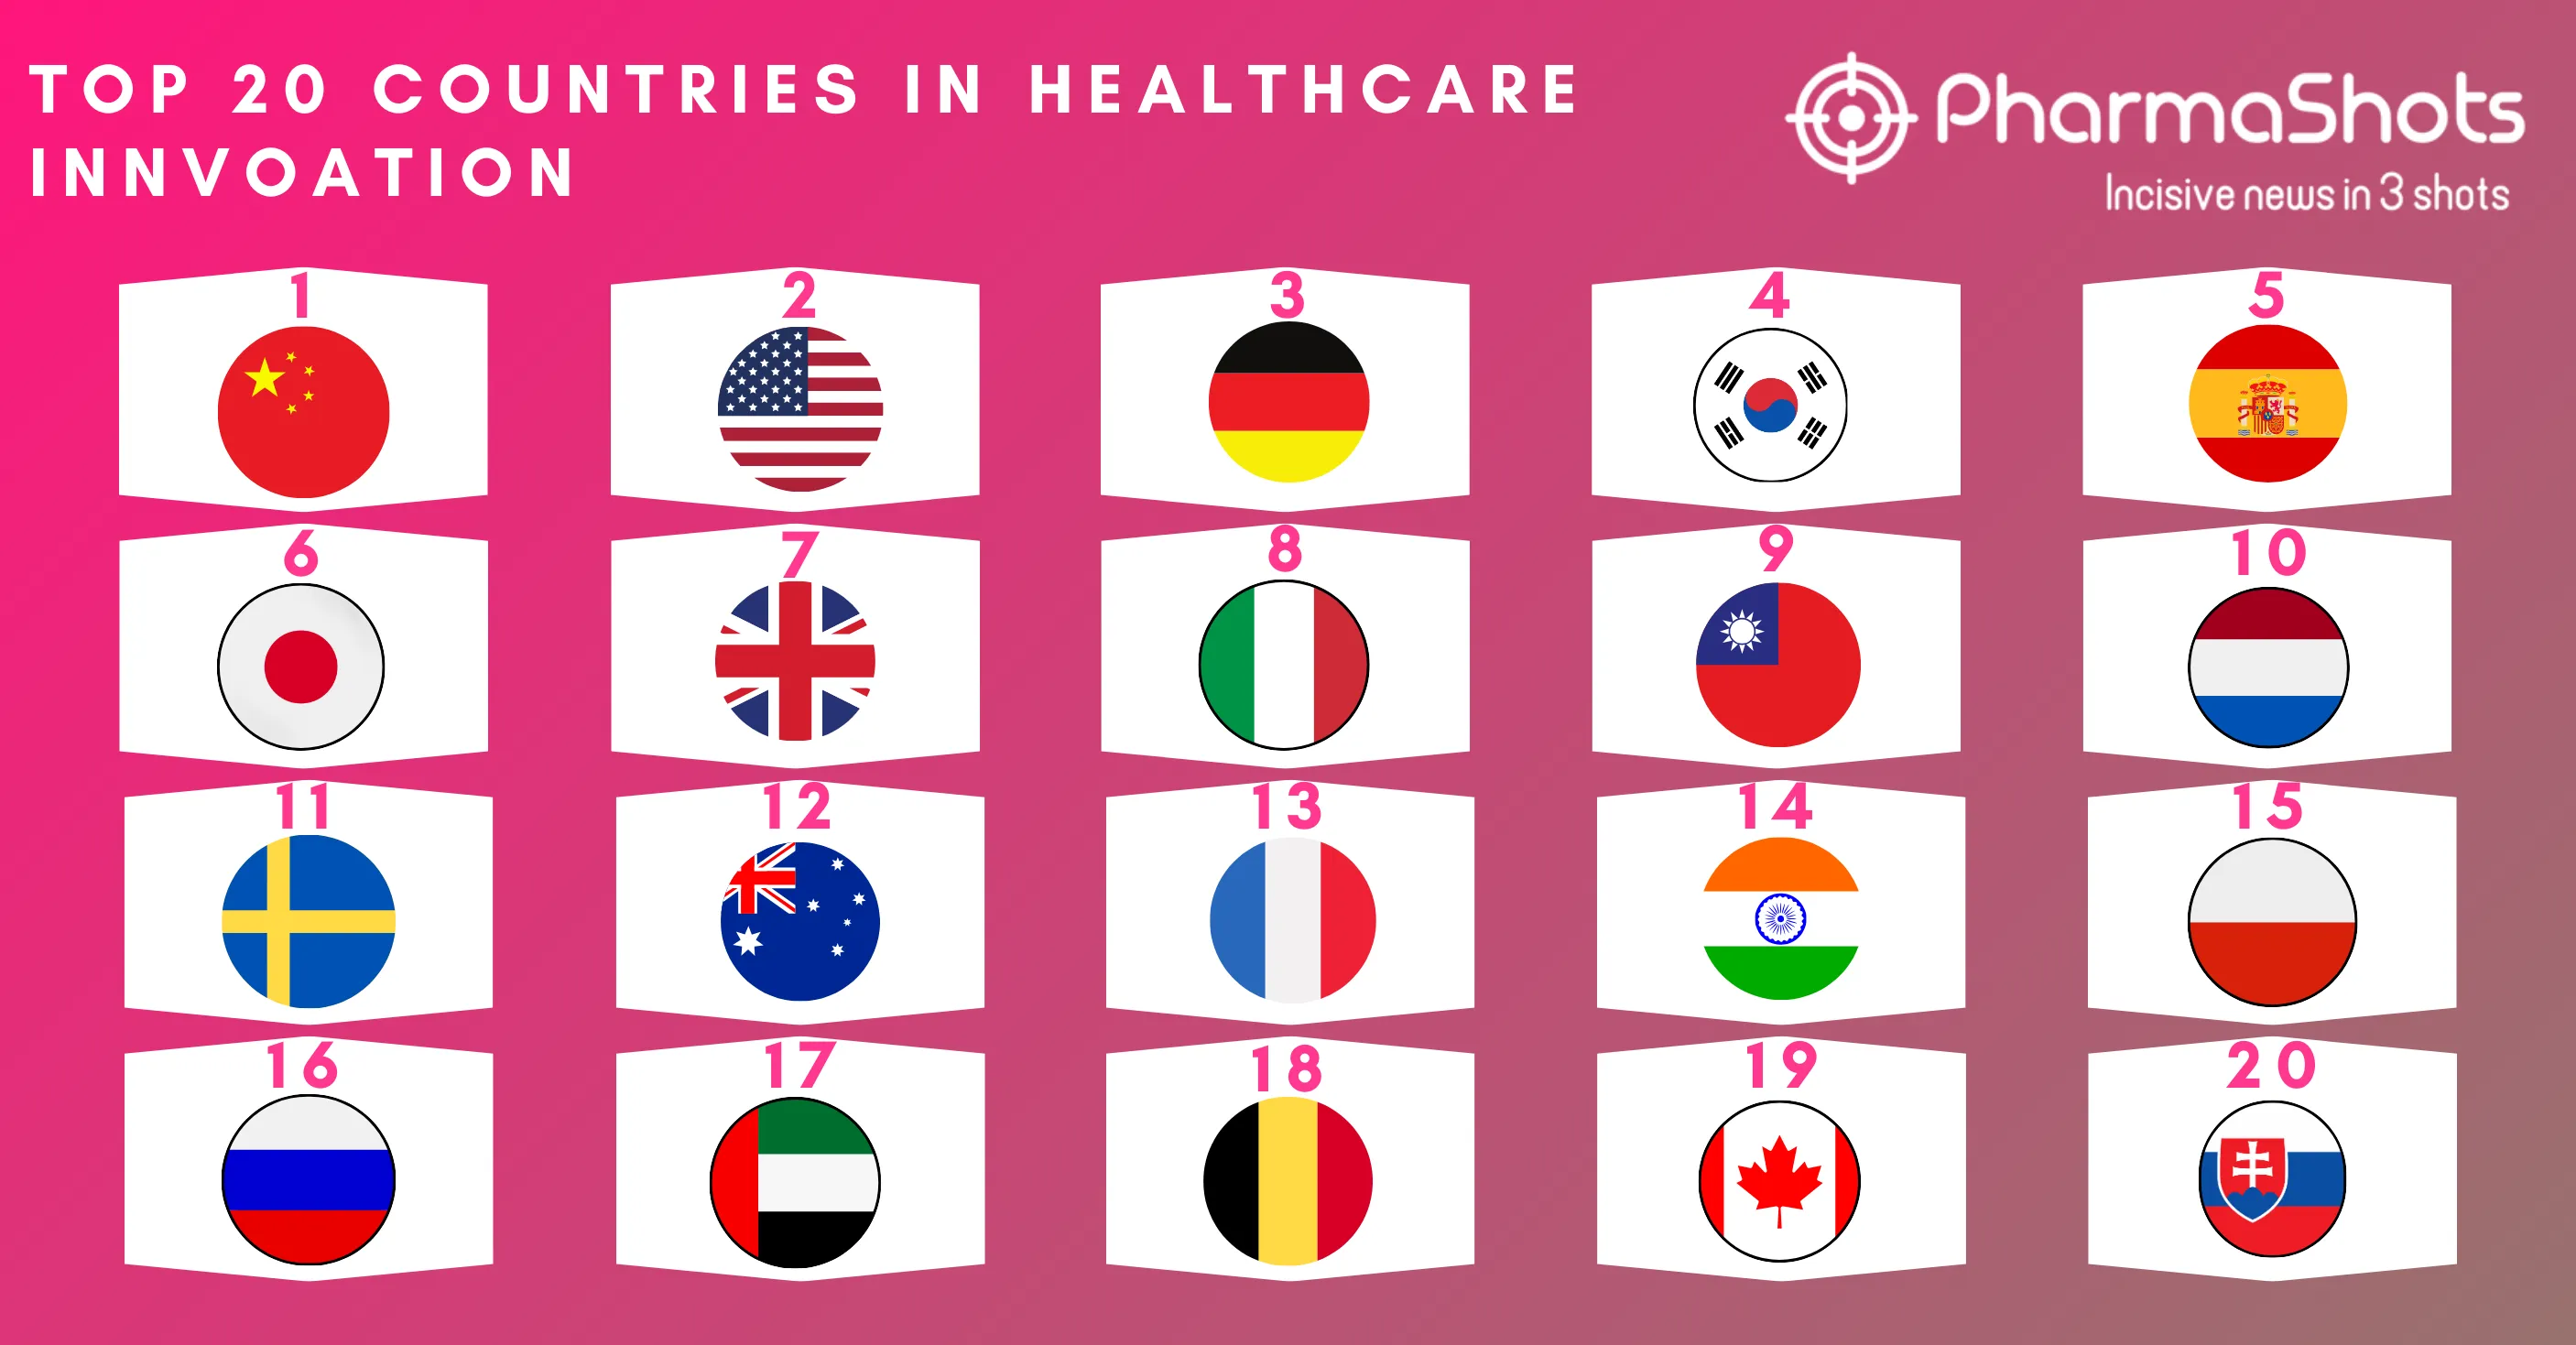 Top 20 Countries in Healthcare Innovation